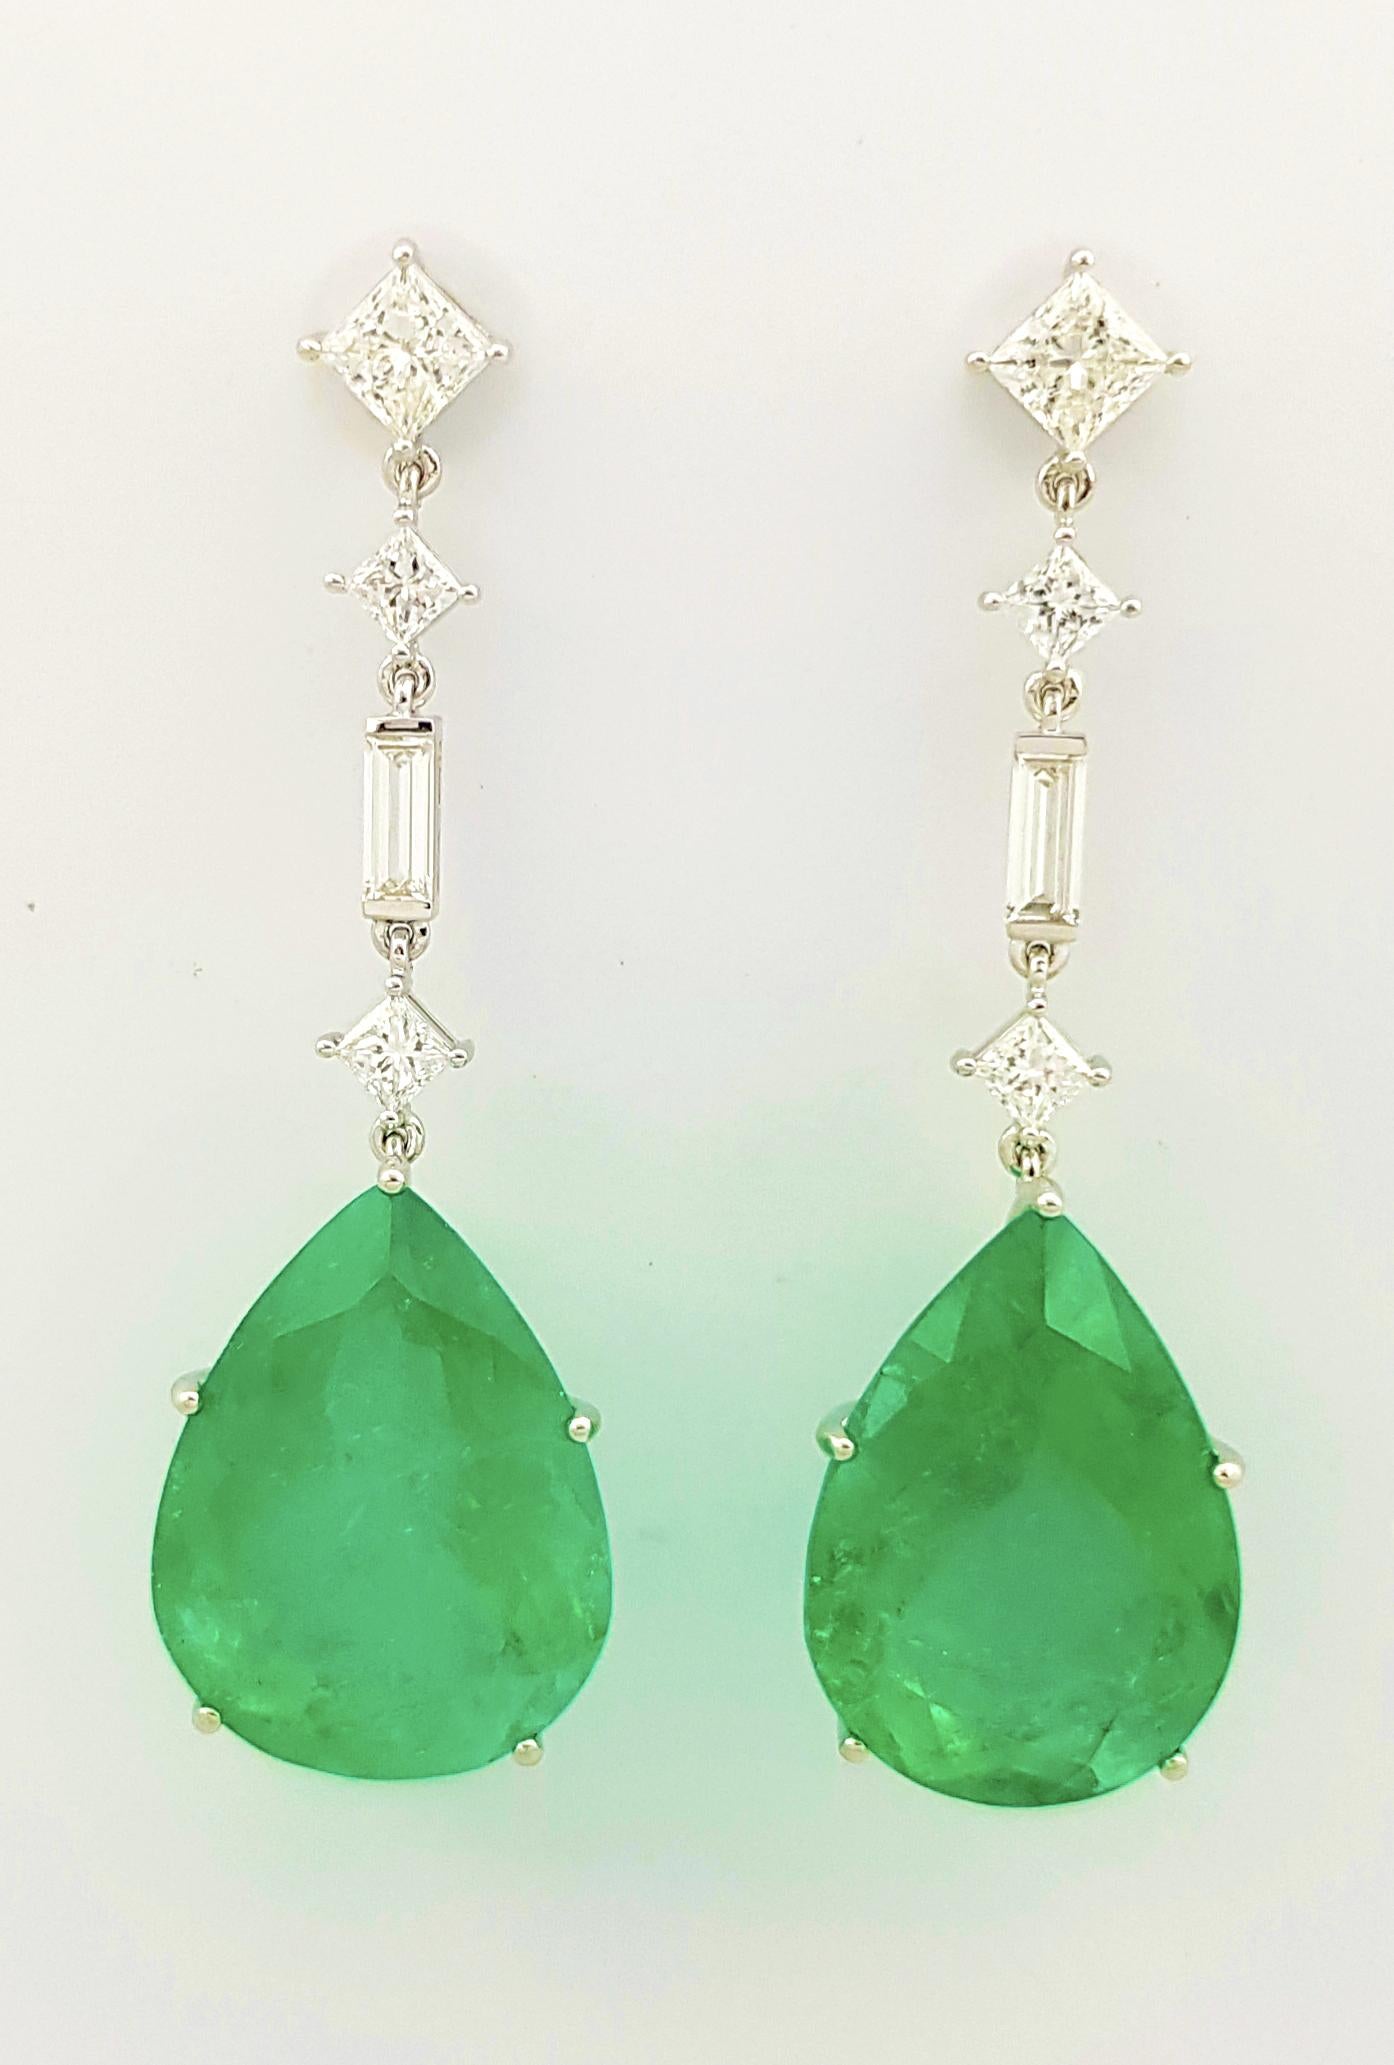 Emerald (2) 50.26 carats, Diamond (2) 1.40 carats and Diamond 1.61 carats Earrings set in Platinum 950 Settings
(GIA Certified)

Width:  1.8 cm 
Length: 5.9 cm
Total Weight: 23.91 grams

Laboratory Certificates
Emerald : GIA 6475057303
Diamond : GIA